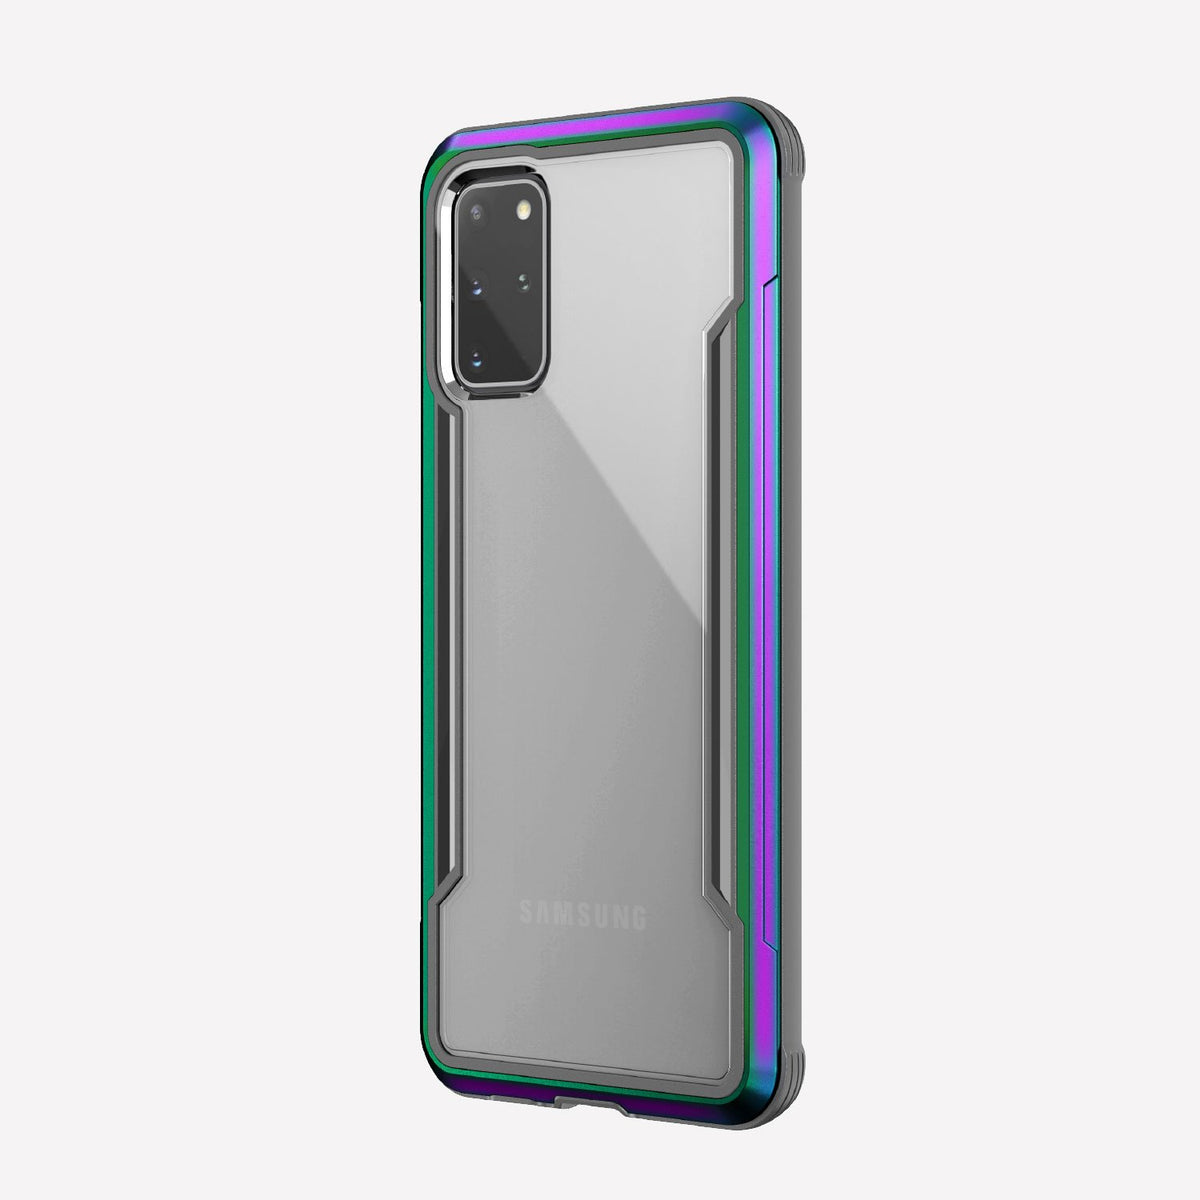 Defense shield iridescent with silver Galaxy S20+ in it showing the back view with the iridescent color on the back panel and that it's transparent